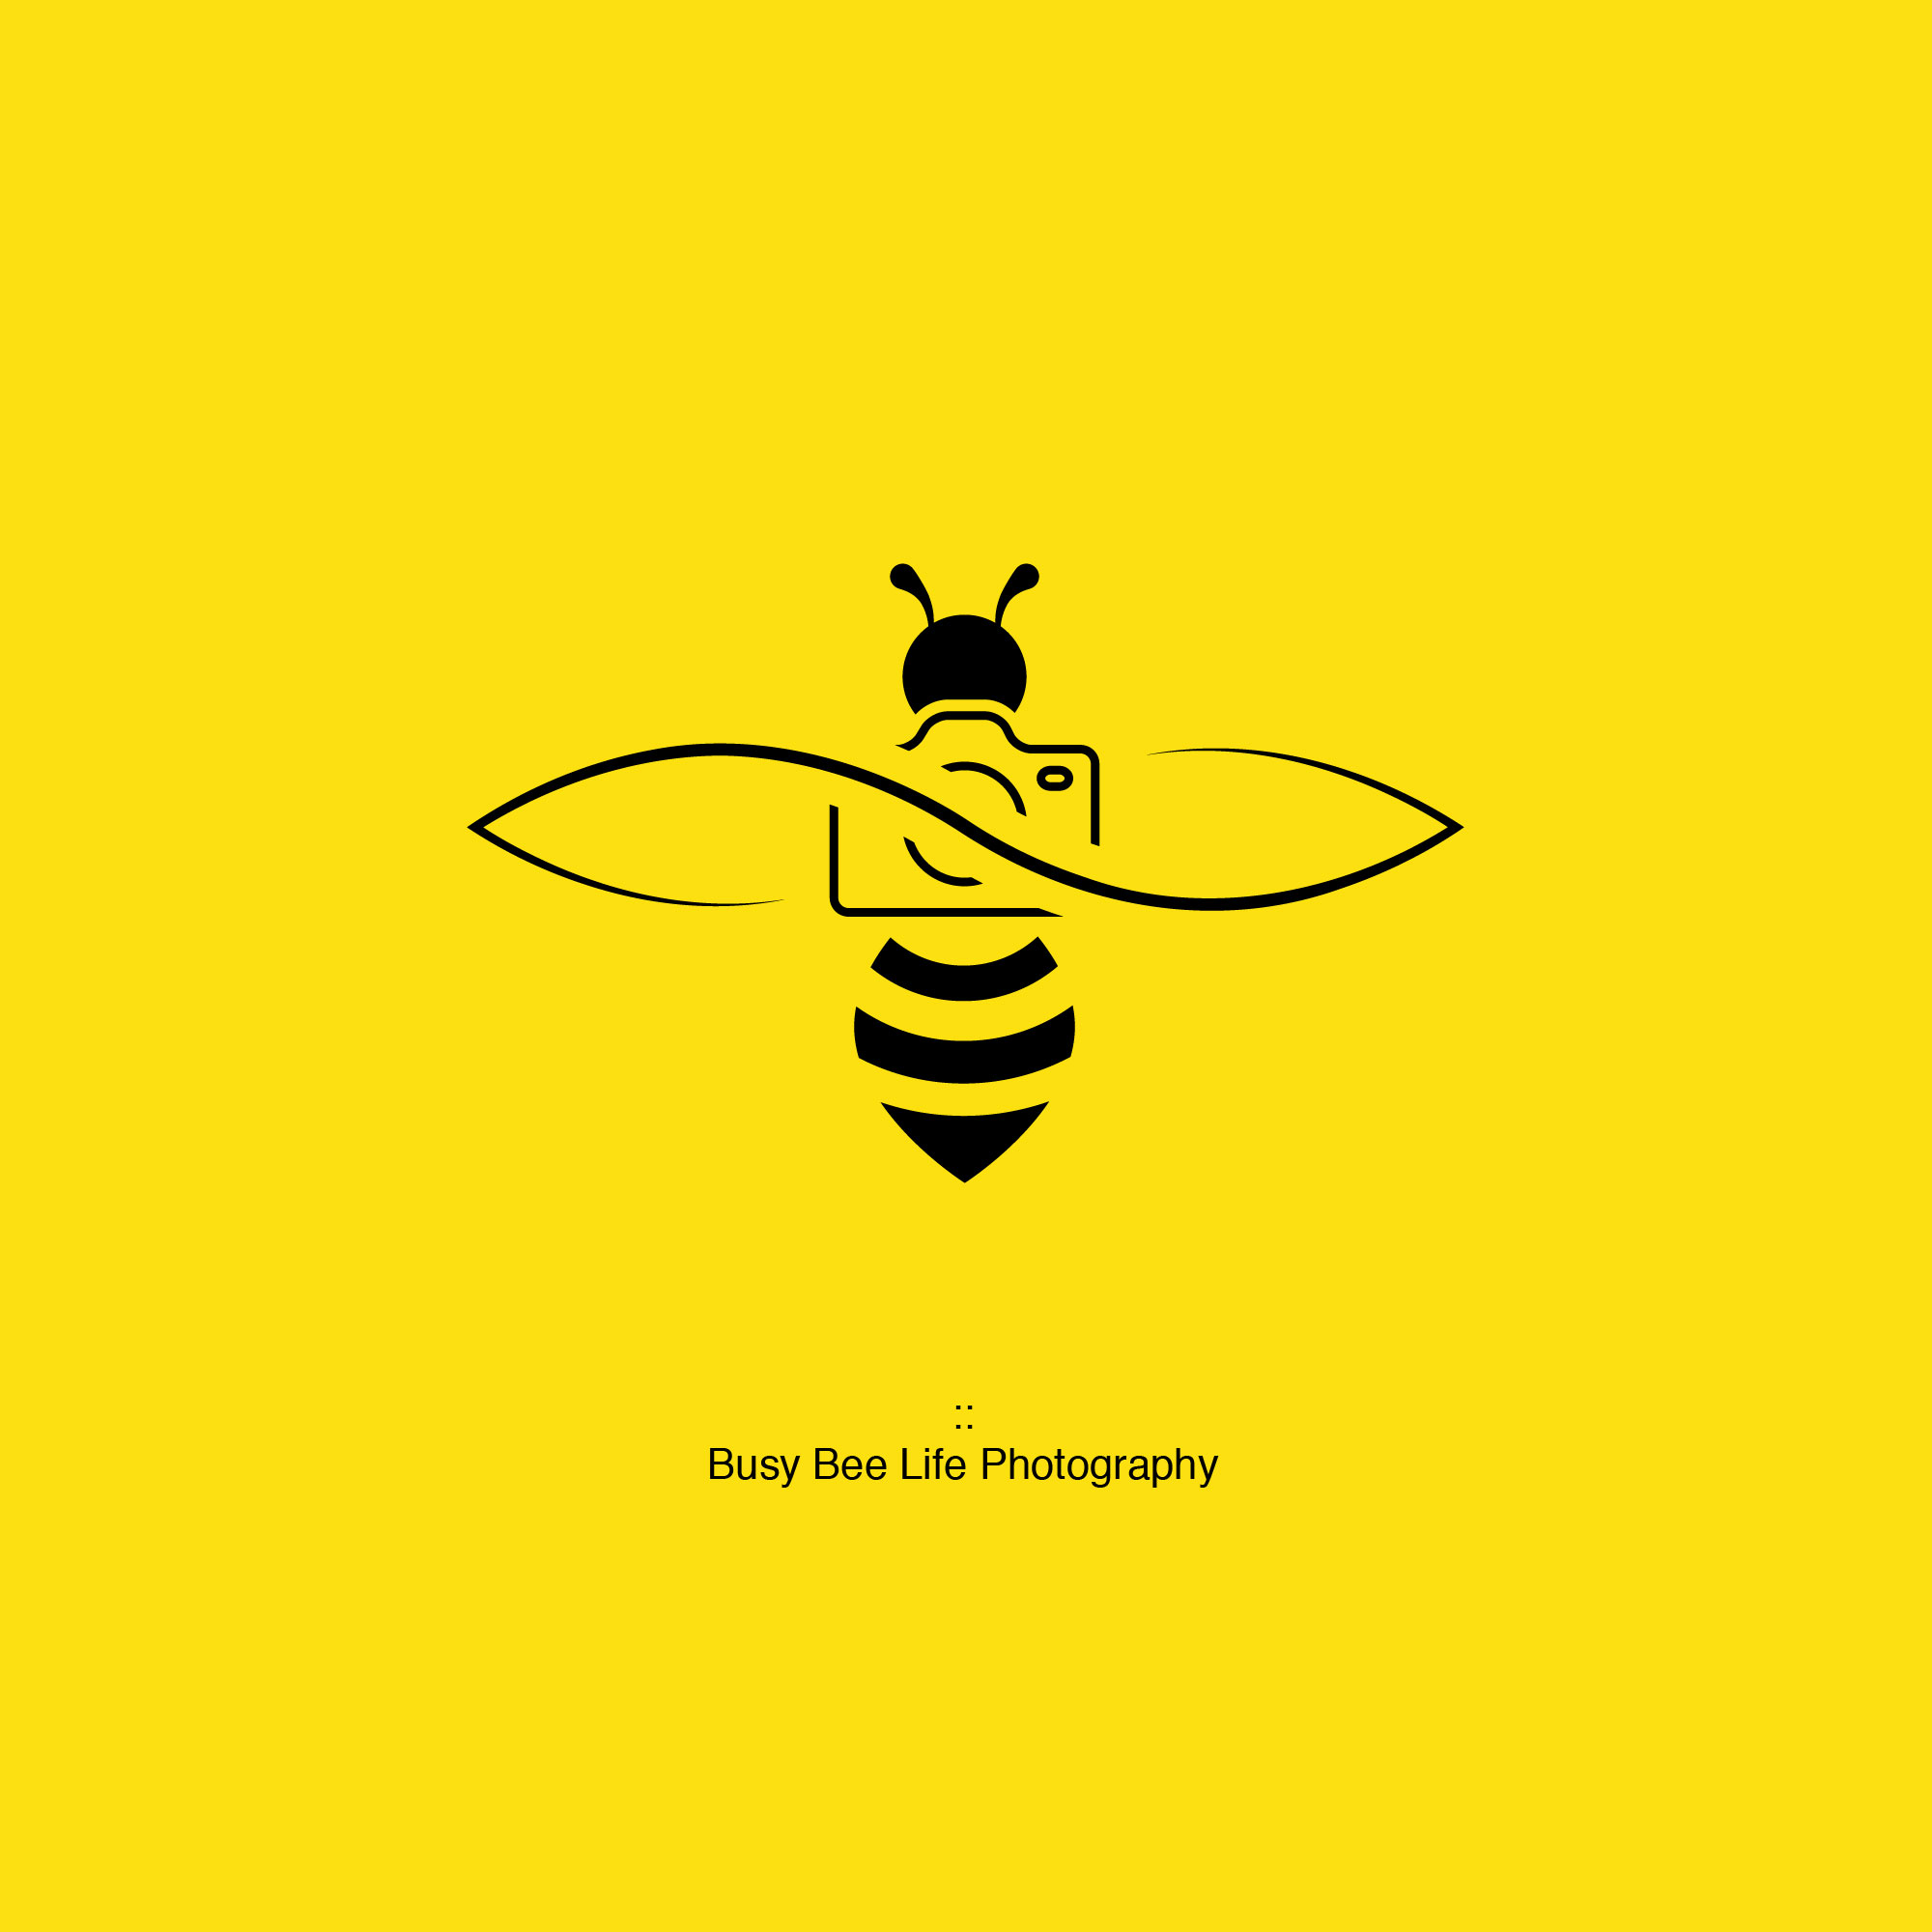 Busy Bee Life Photography